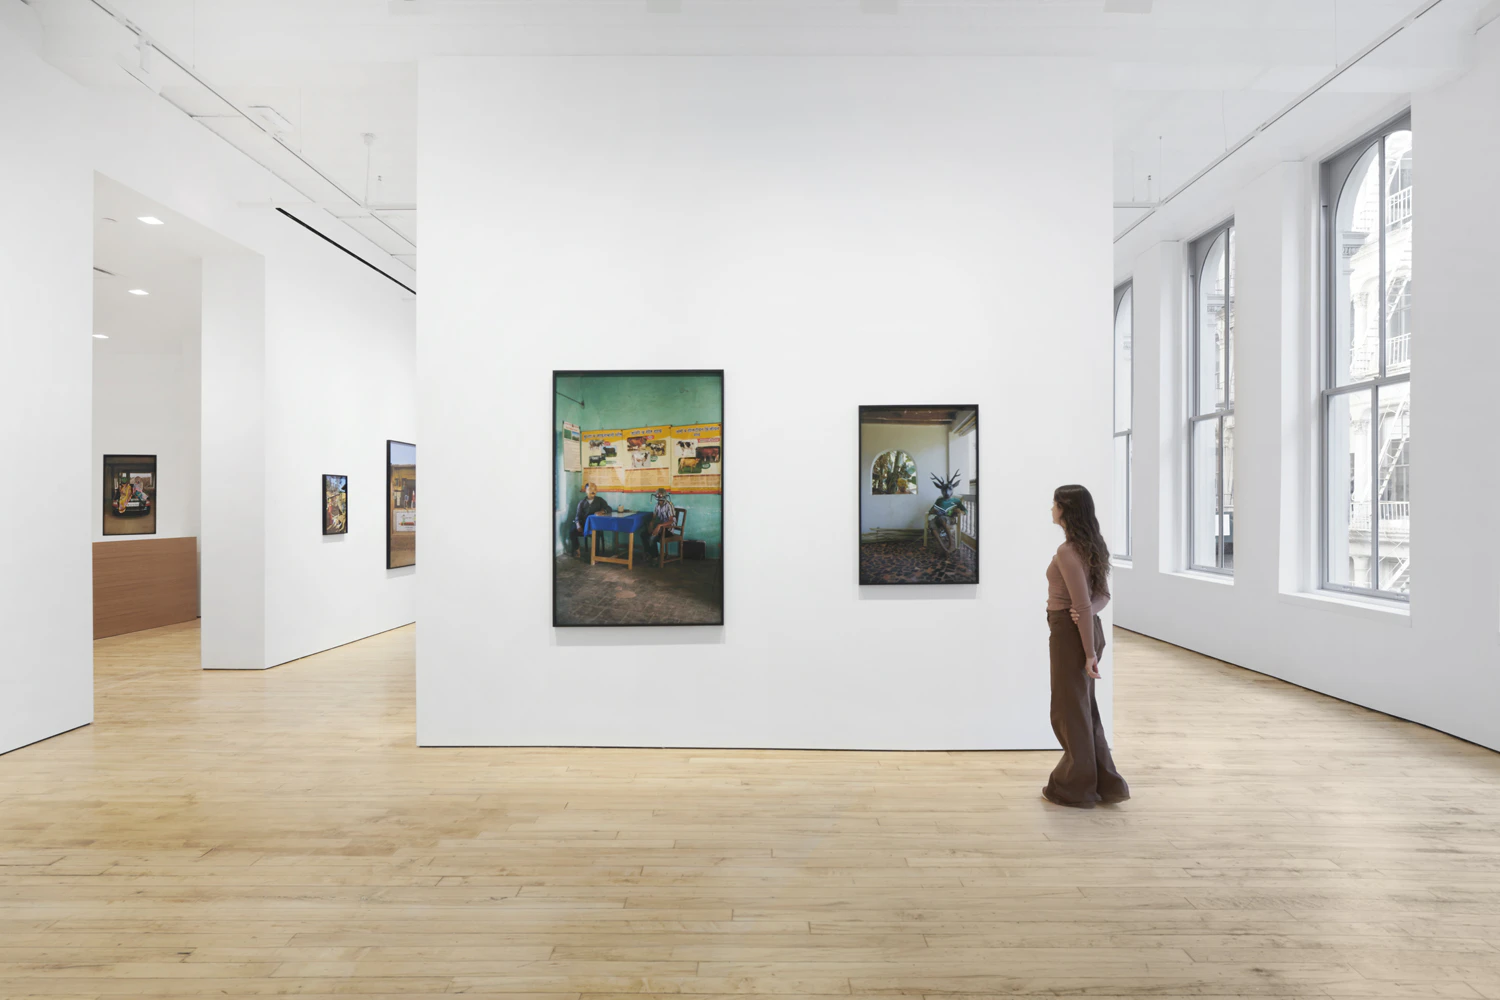 Installation view, Gauri Gill, A Time to Play: New Scenes from Acts of Appearance, James Cohan, 52 Walker Street, October 7-November 13, 2021